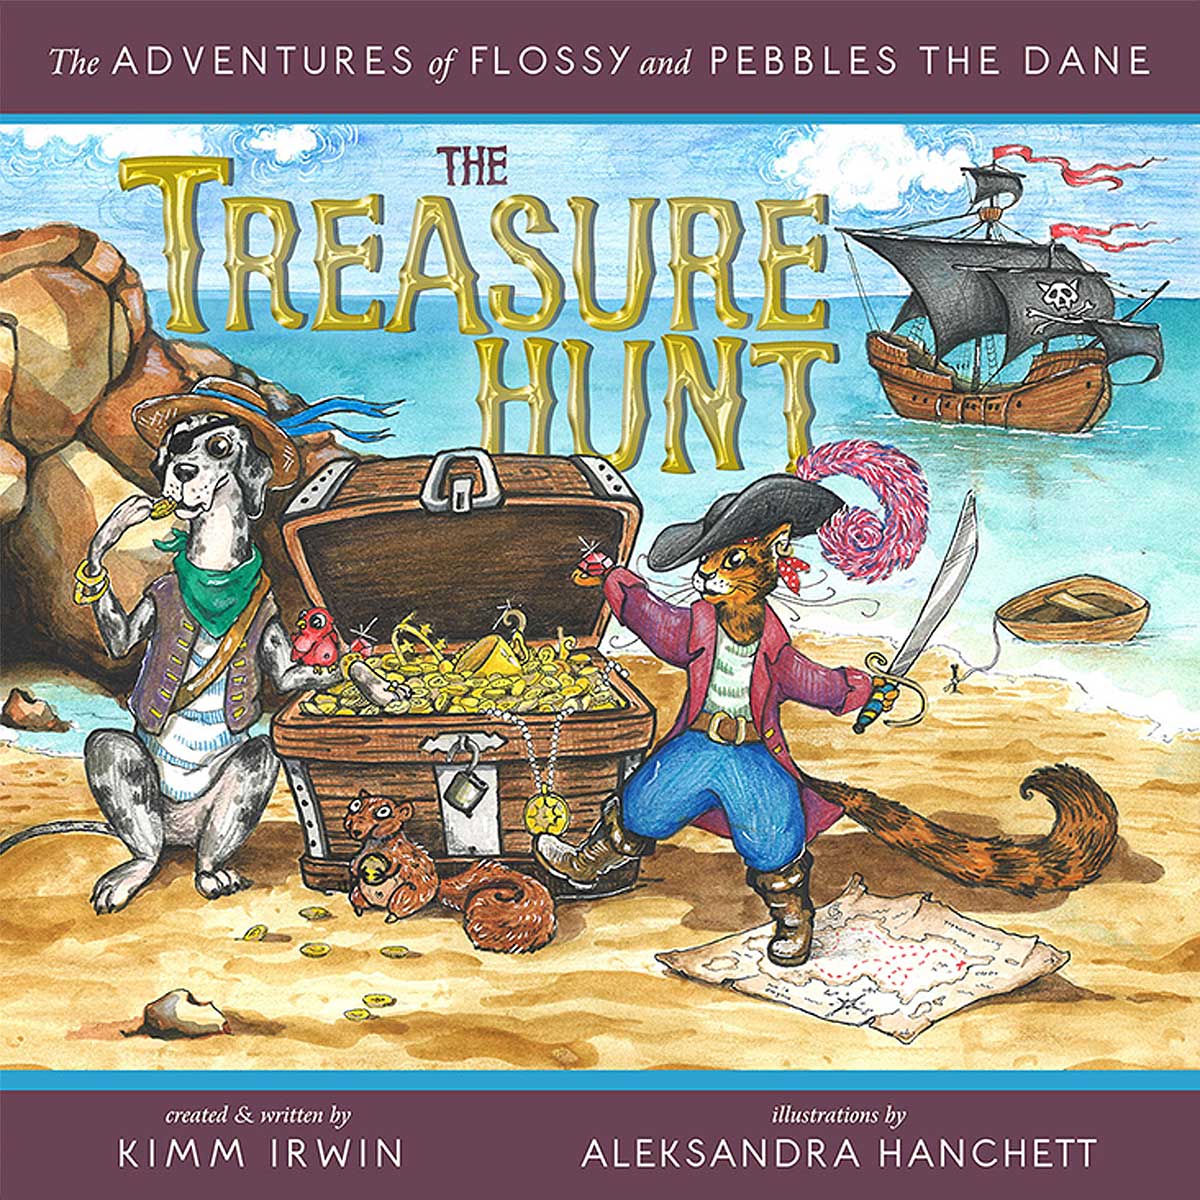 Children's book cover with cute illustrated dog and cat wearing pirate costumes and standing by a treasure chest